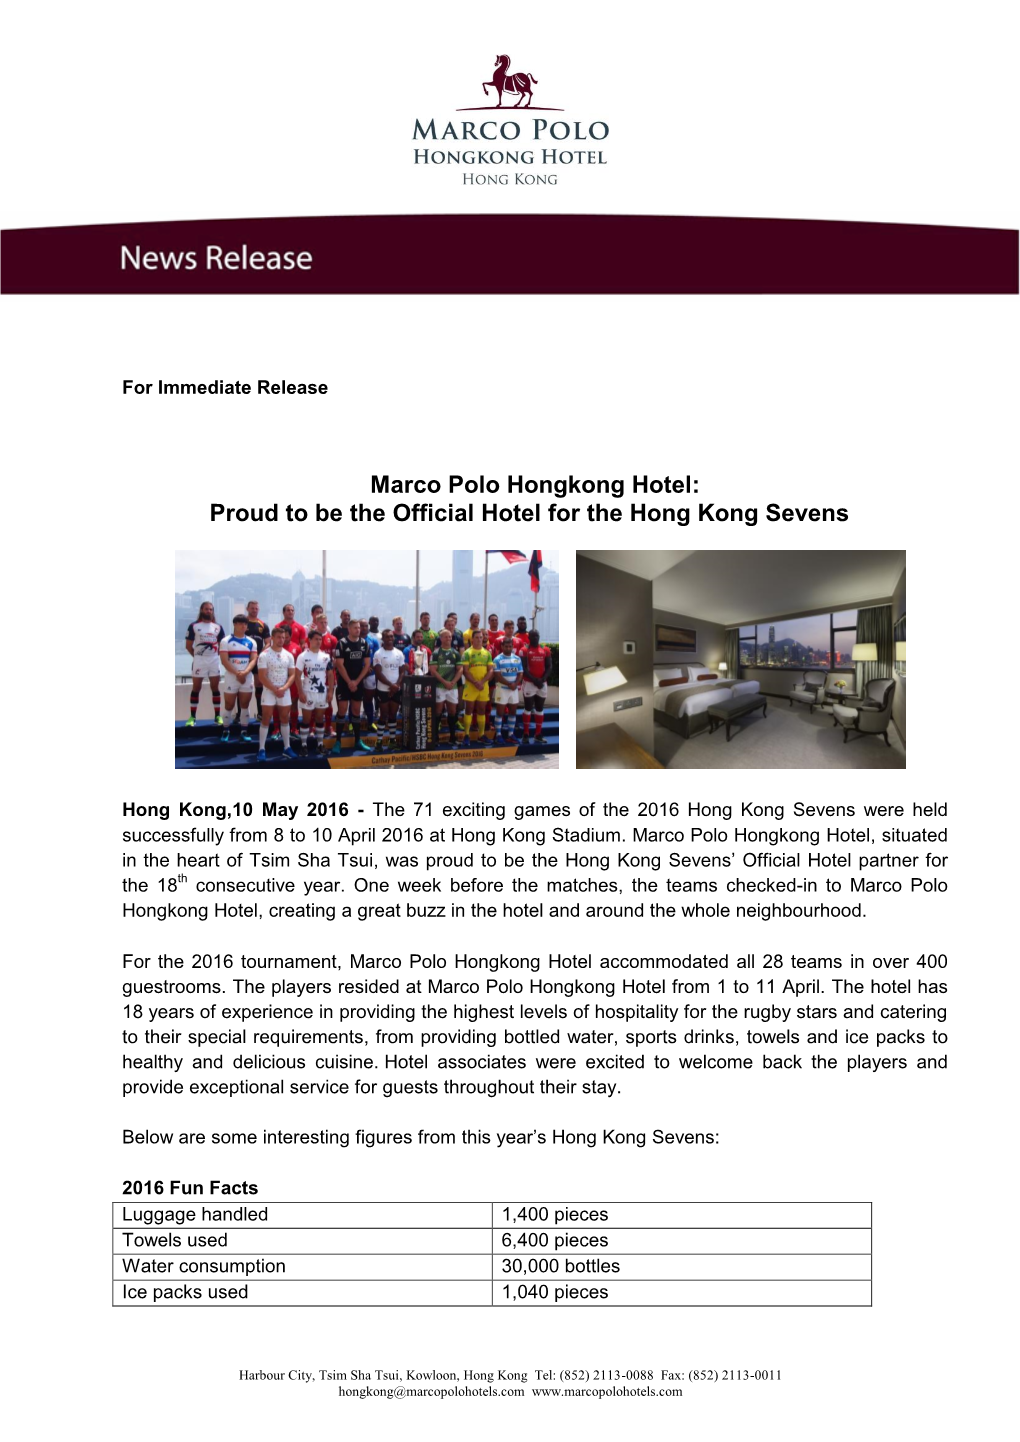 Marco Polo Hongkong Hotel: Proud to Be the Official Hotel for the Hong Kong Sevens